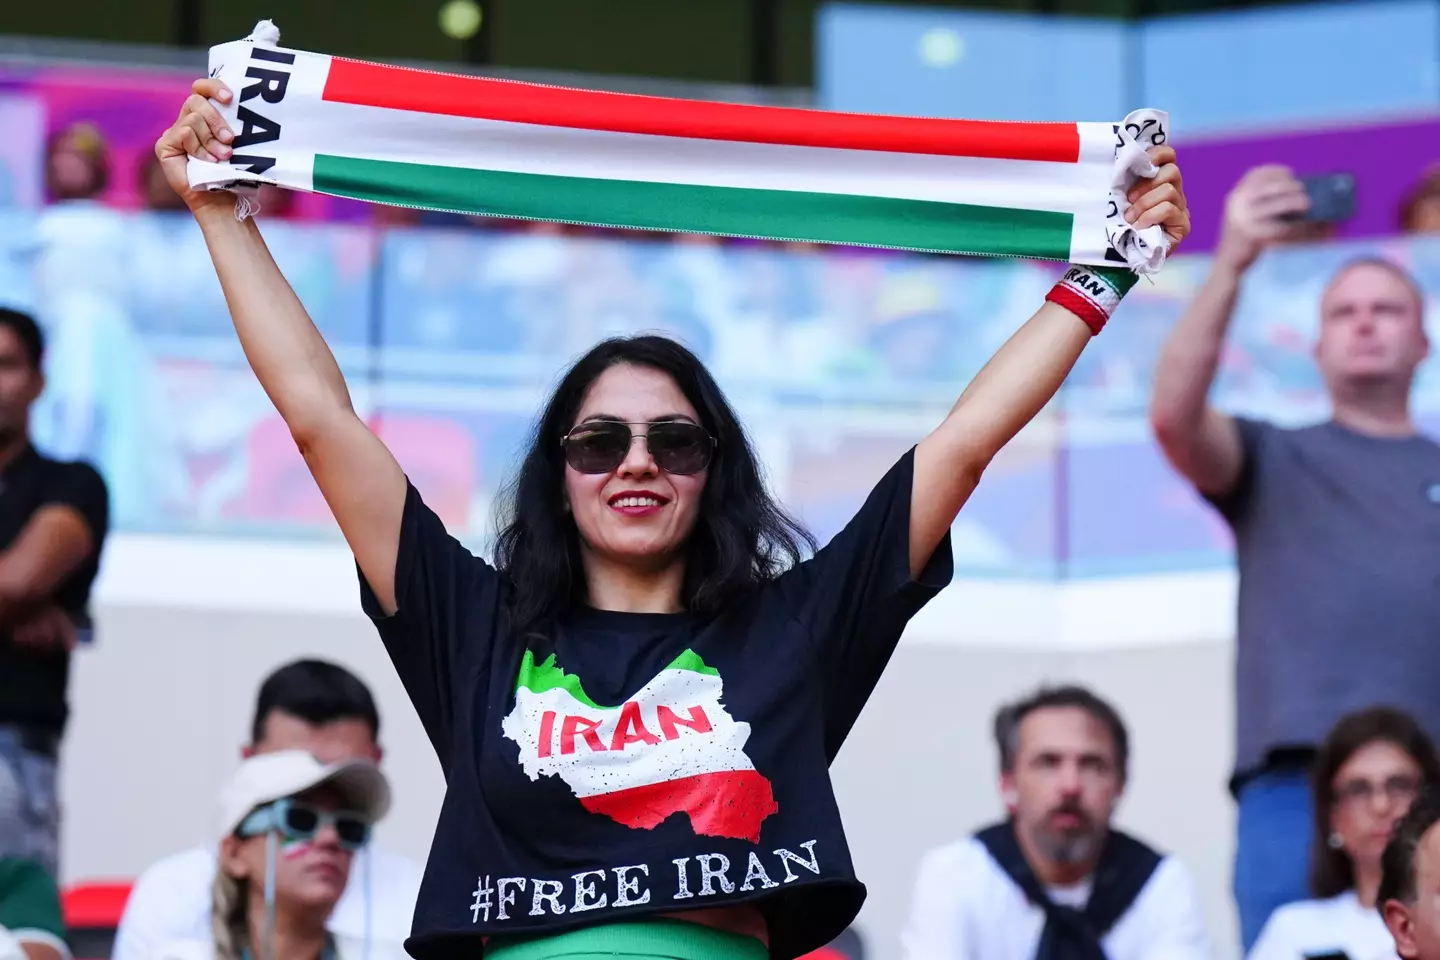 Iranian fans have been protesting at the World Cup.